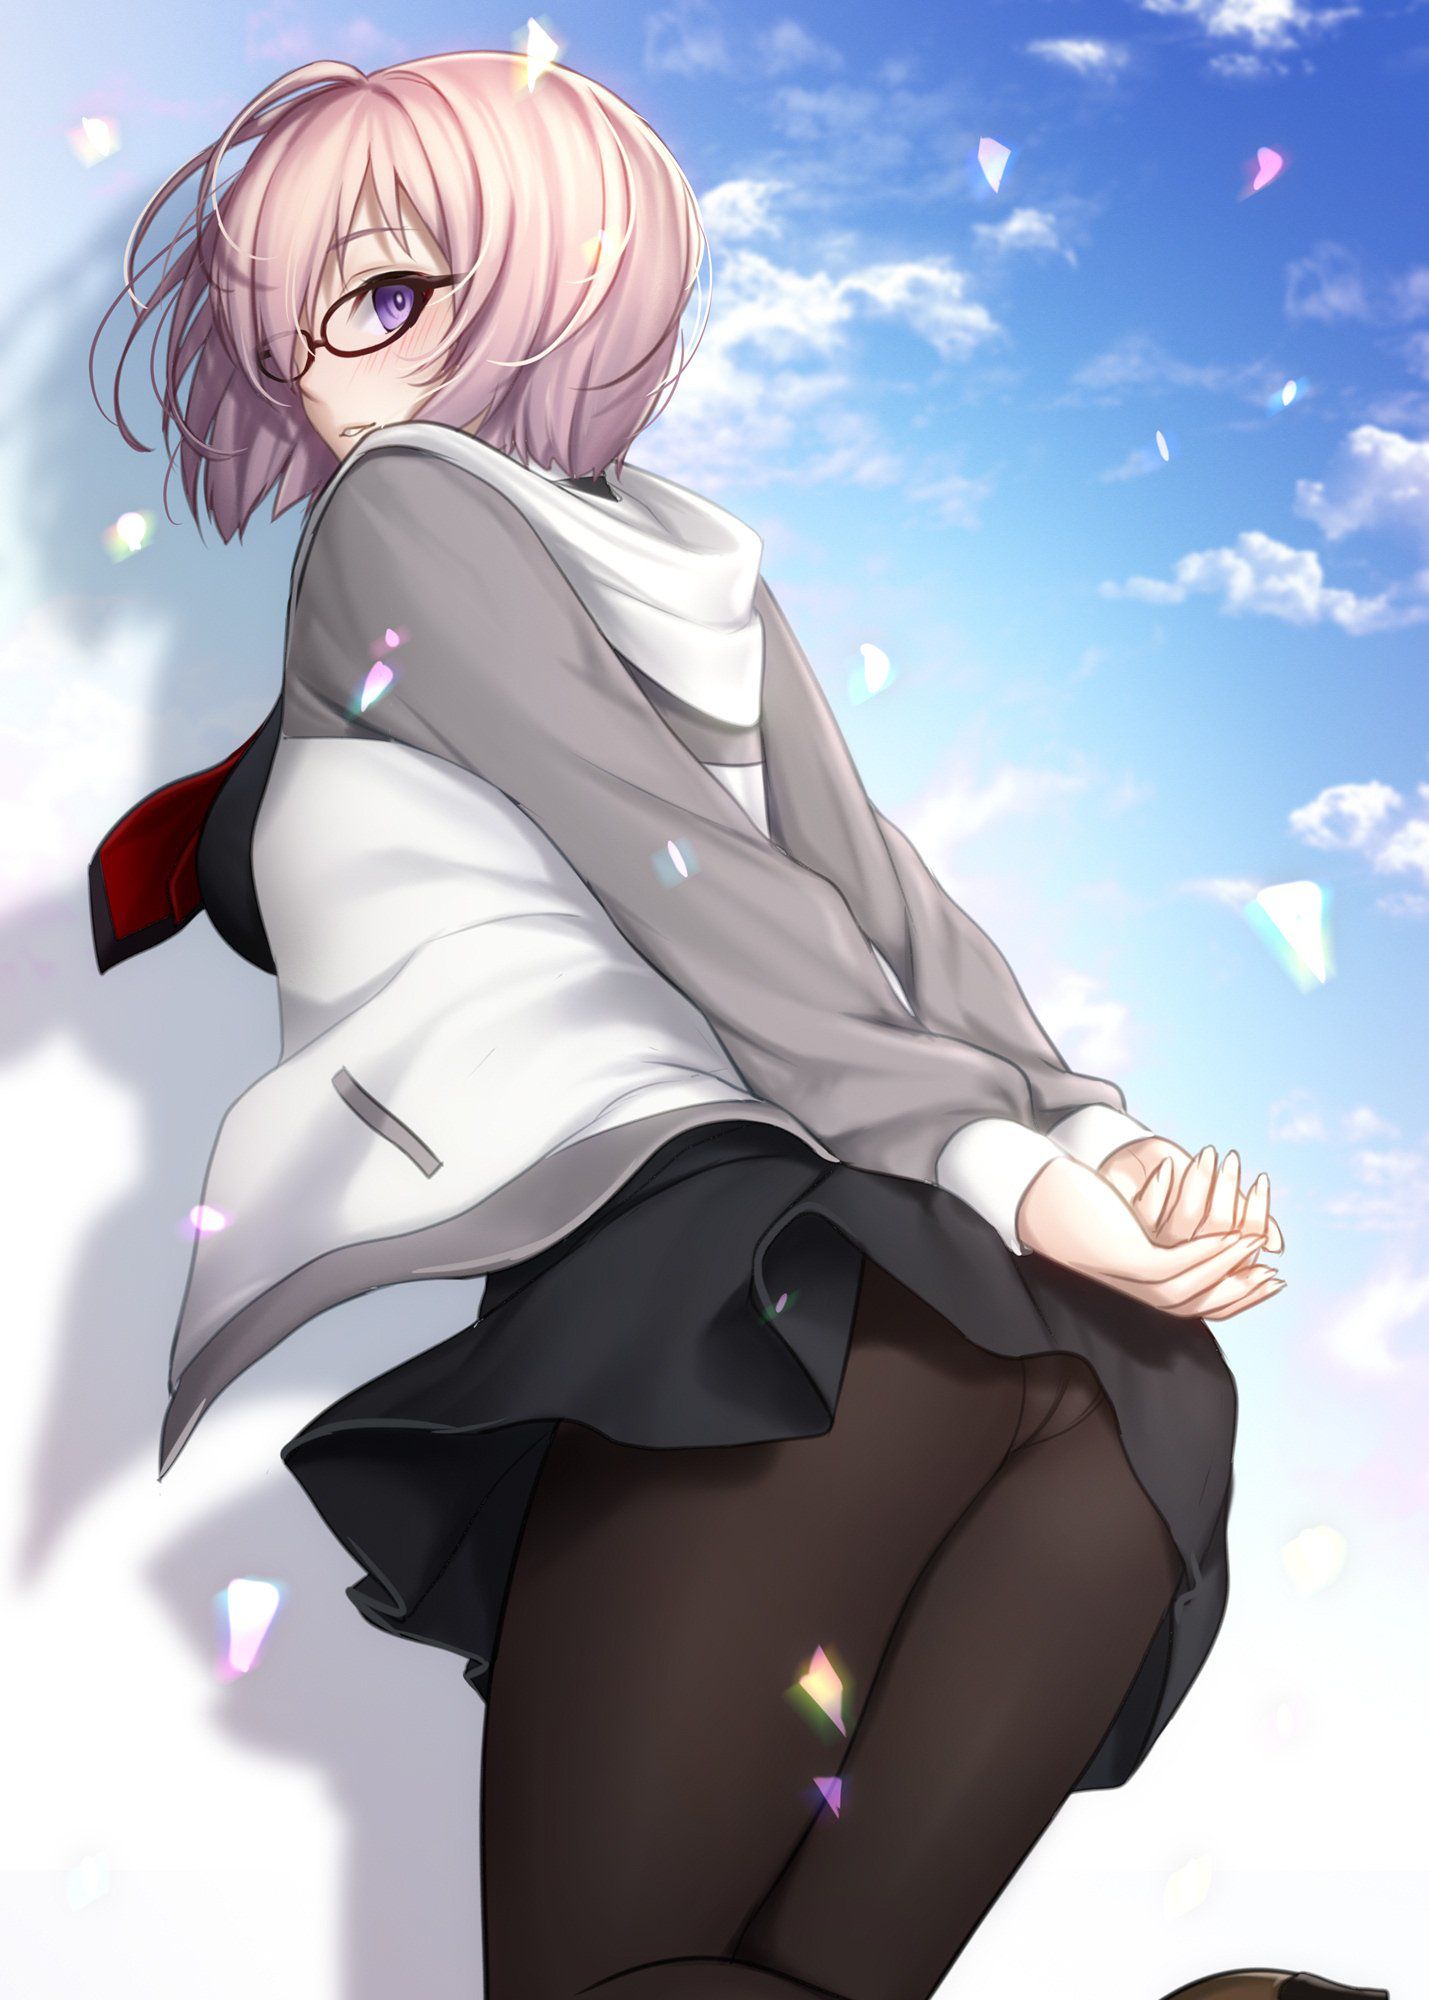 [2nd] Cute Glasses Daughter Secondary Image Part 45 [Glasses Daughter Non-Erotic] 21